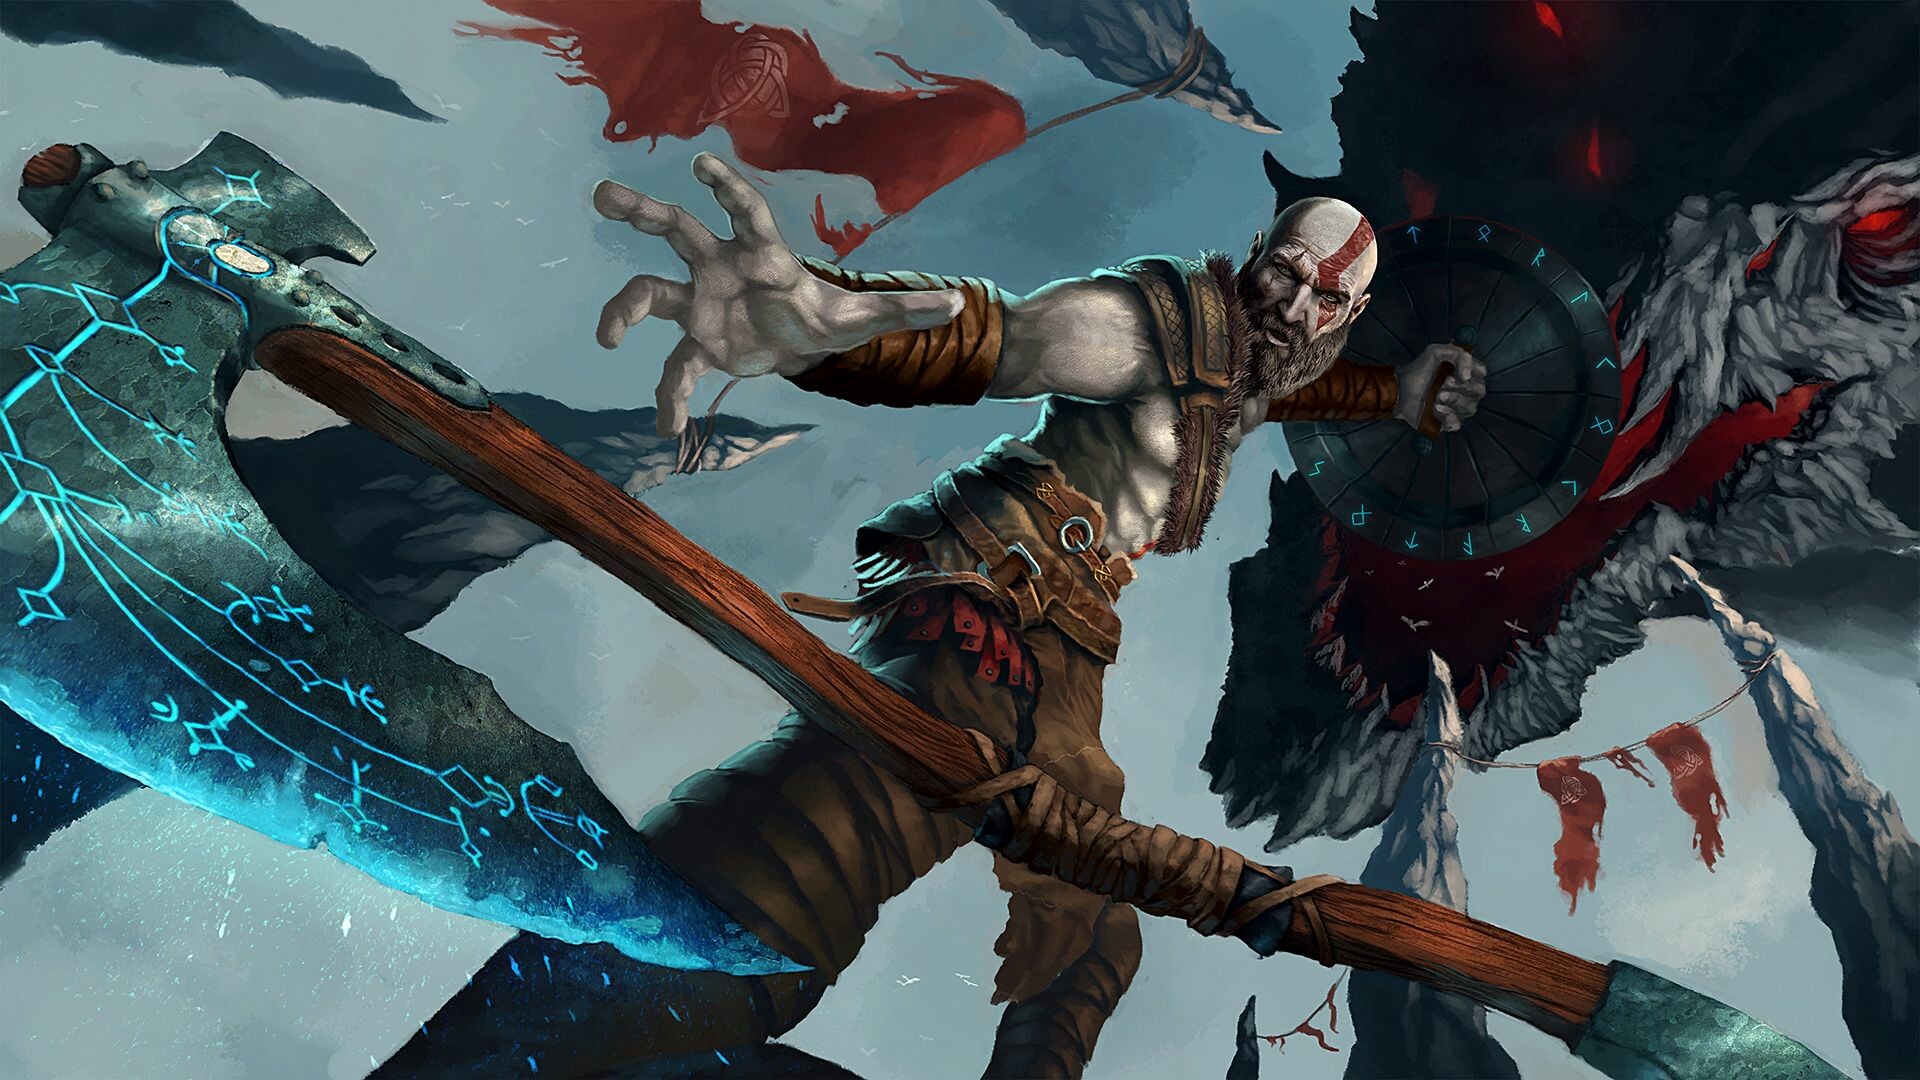 God of War: The series features a range of traditional figures, including those from Greek mythology, such as the Olympian Gods, Titans, and Greek heroes, and those from Norse mythology, including the AEsir and Vanir gods and other beings. 1920x1080 Full HD Wallpaper.